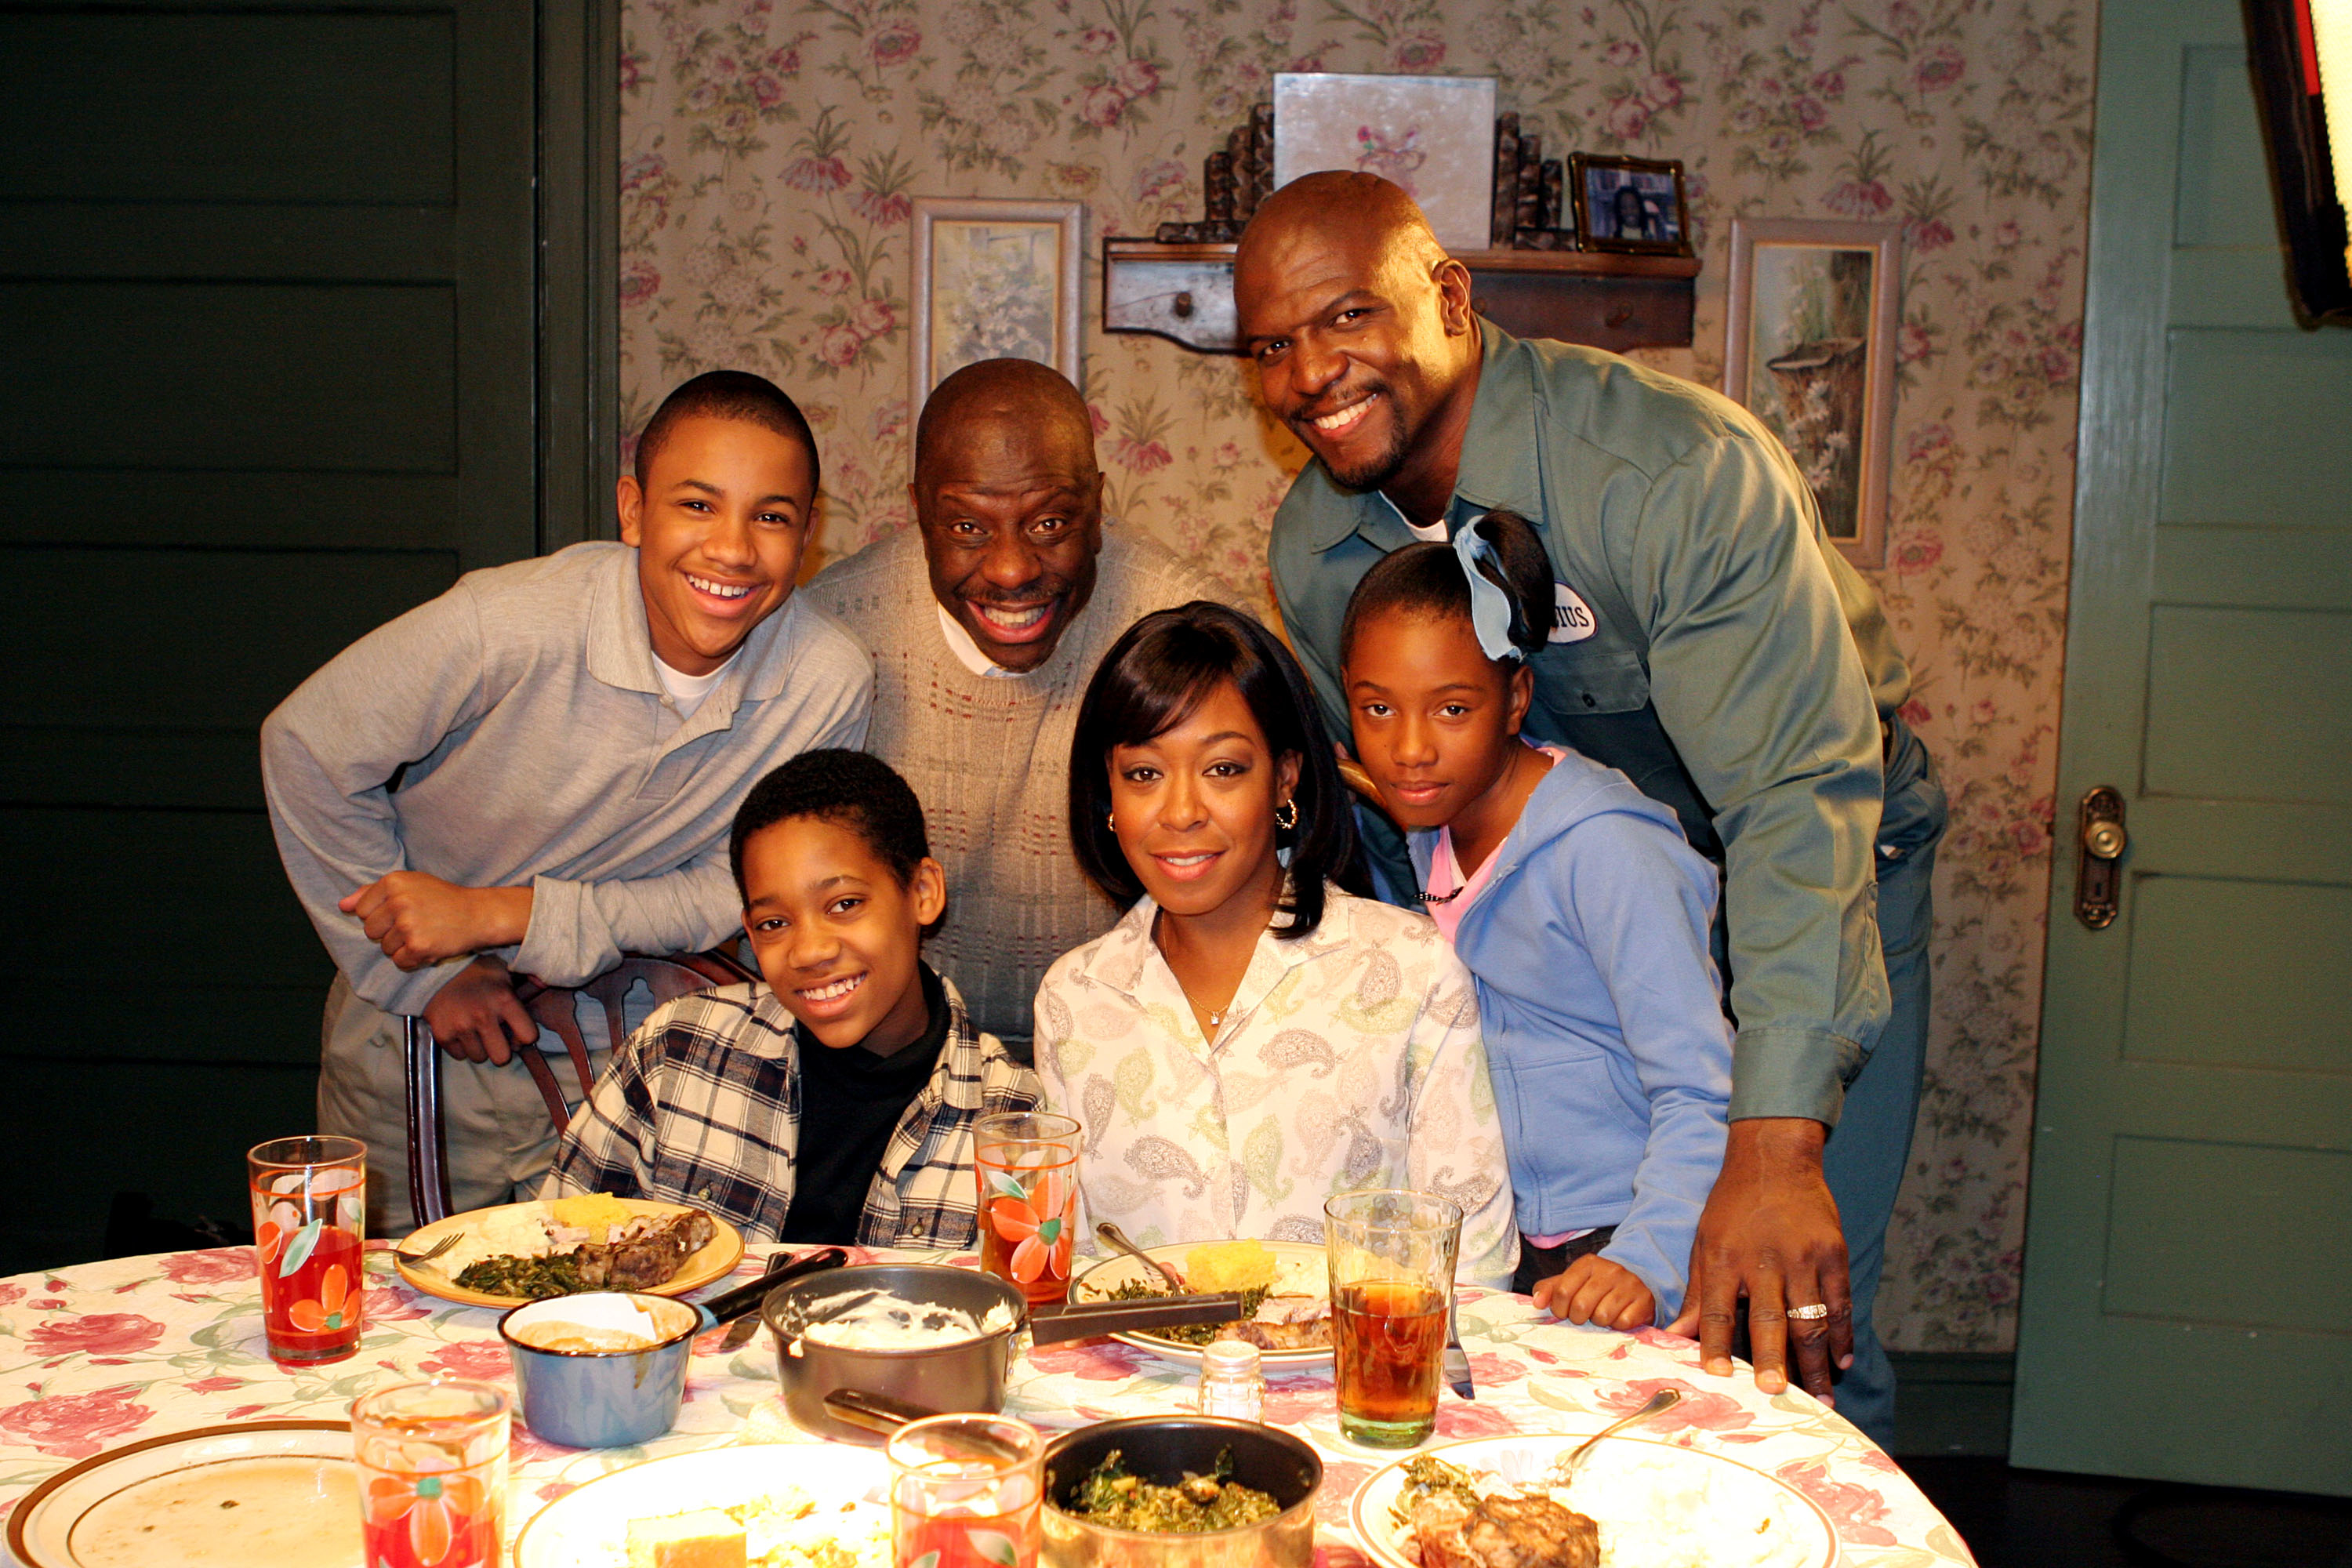 Family photo with five people smiling at a dining table, appearing in a home setting